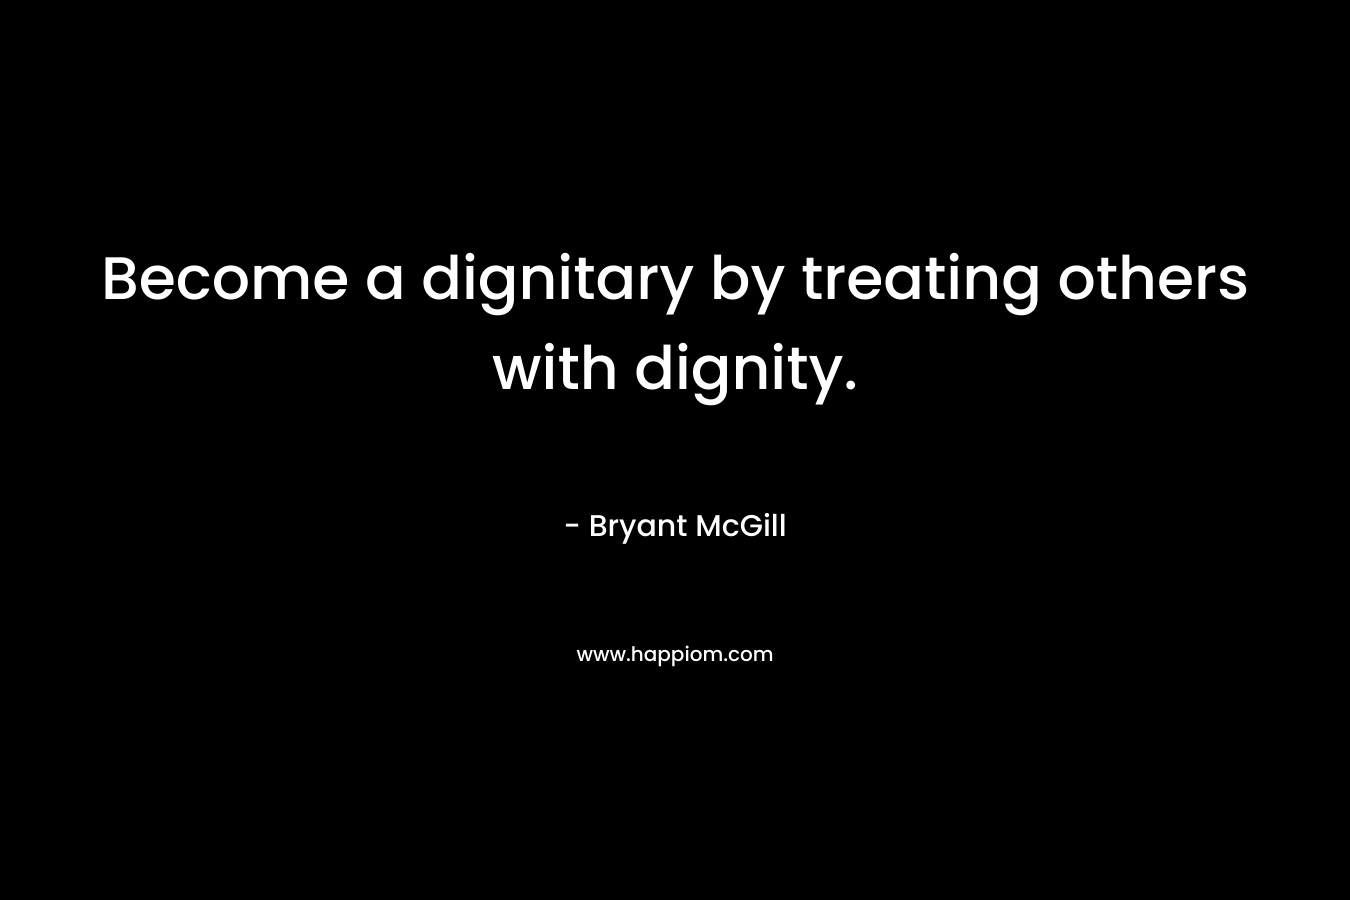 Become a dignitary by treating others with dignity.